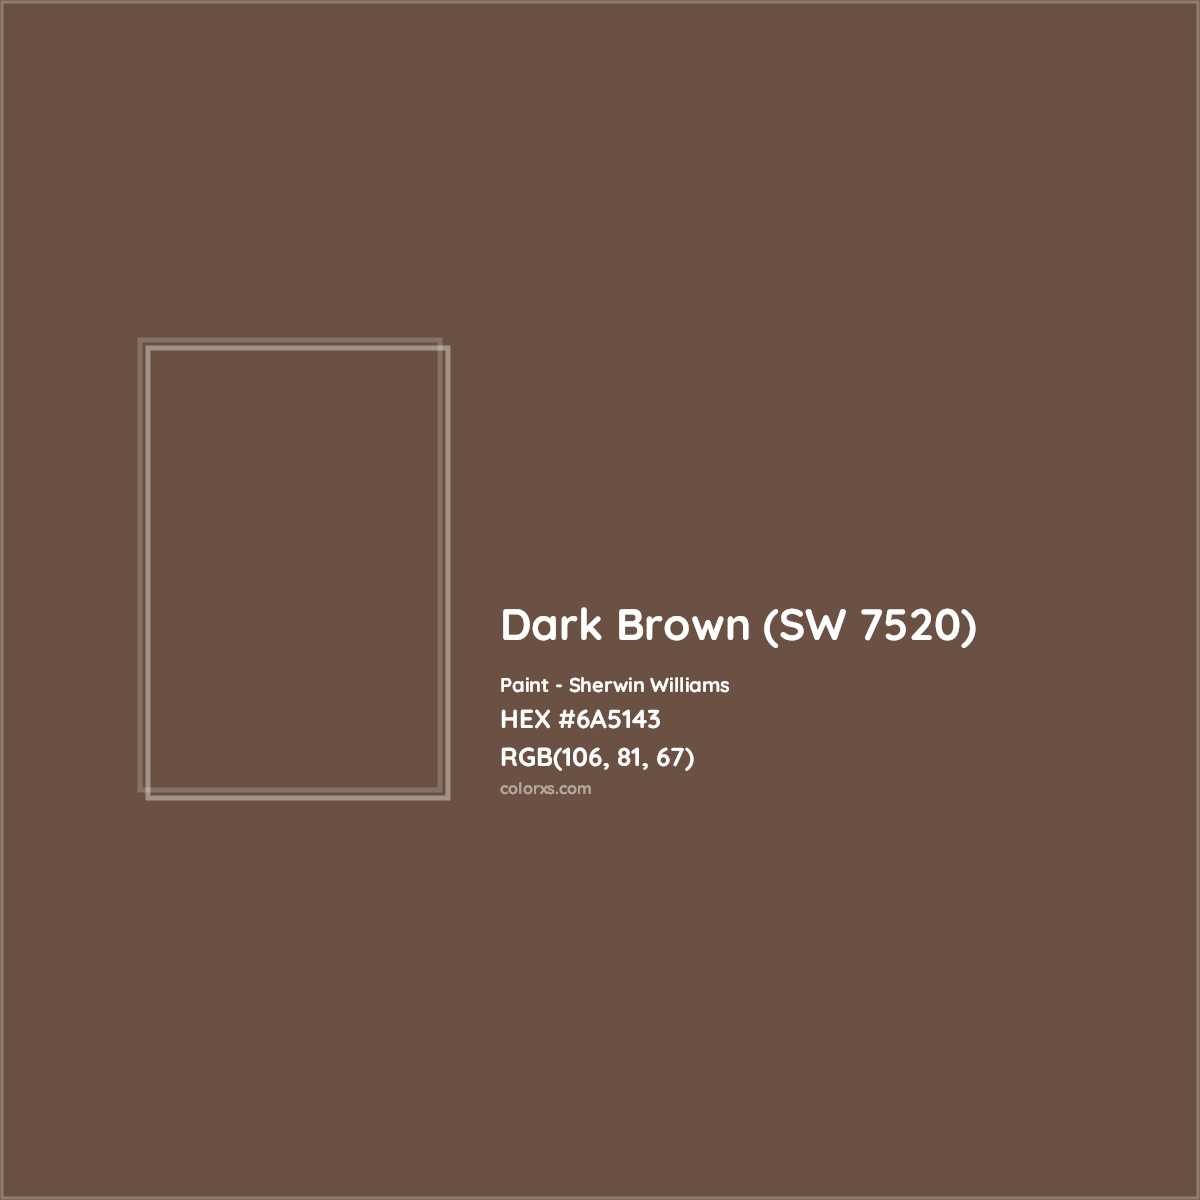 HEX #6A5143 Dark Brown (SW 7520) Paint Sherwin Williams - Color Code